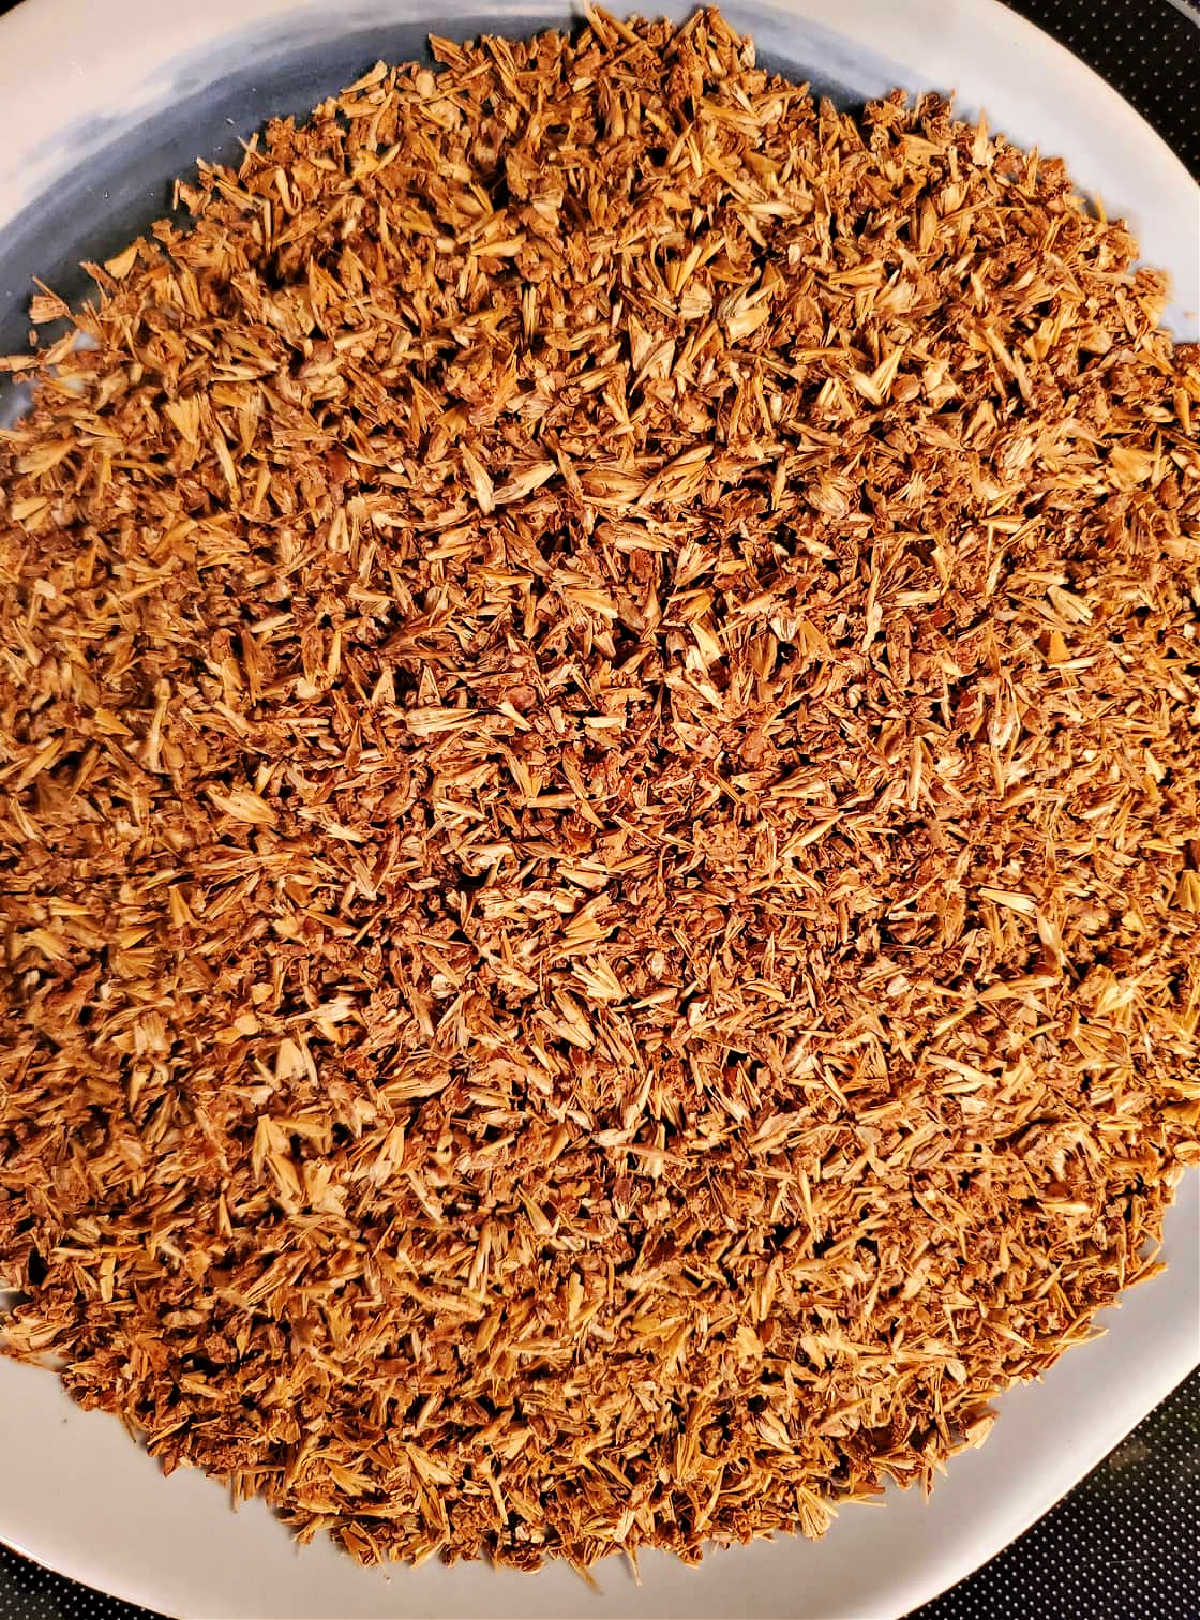 An overhead shot of cracked and dried spent grains from brewing beer.